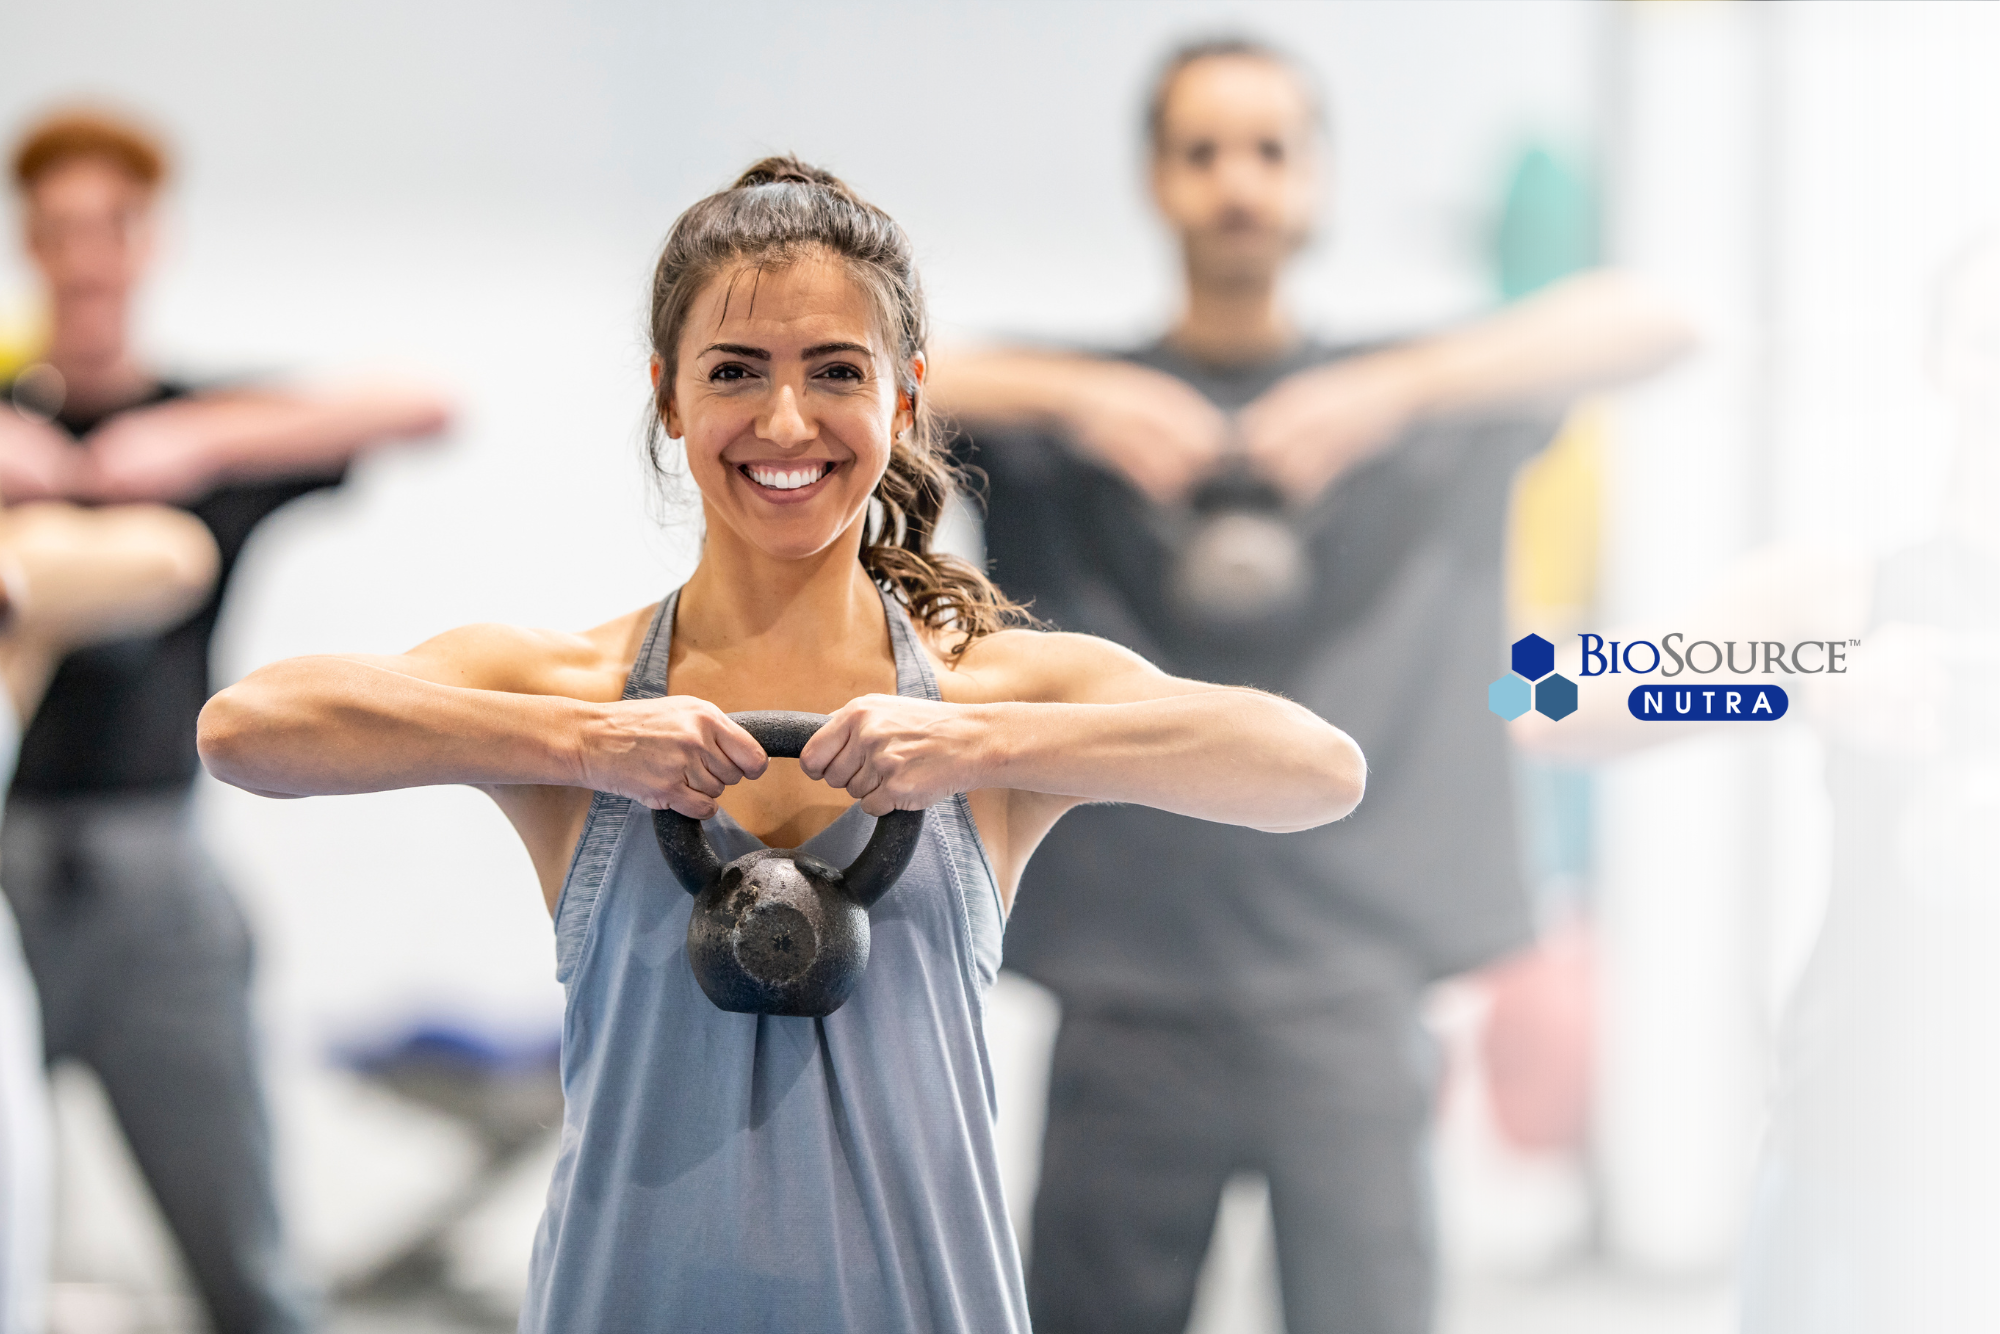 A woman works out with a kettlebell weight